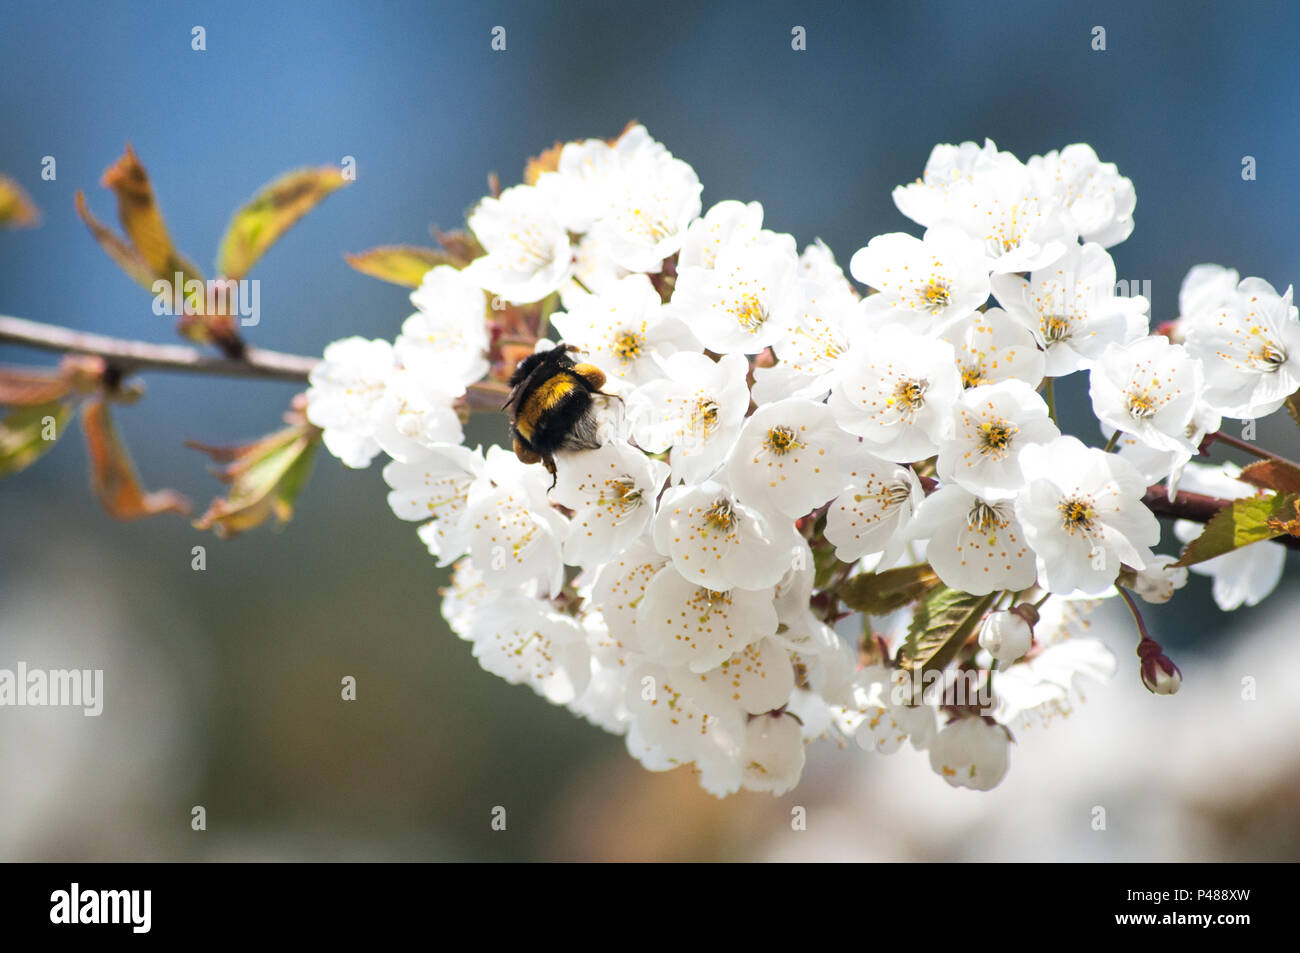 Bee collecting pollen on blossoms Stock Photo